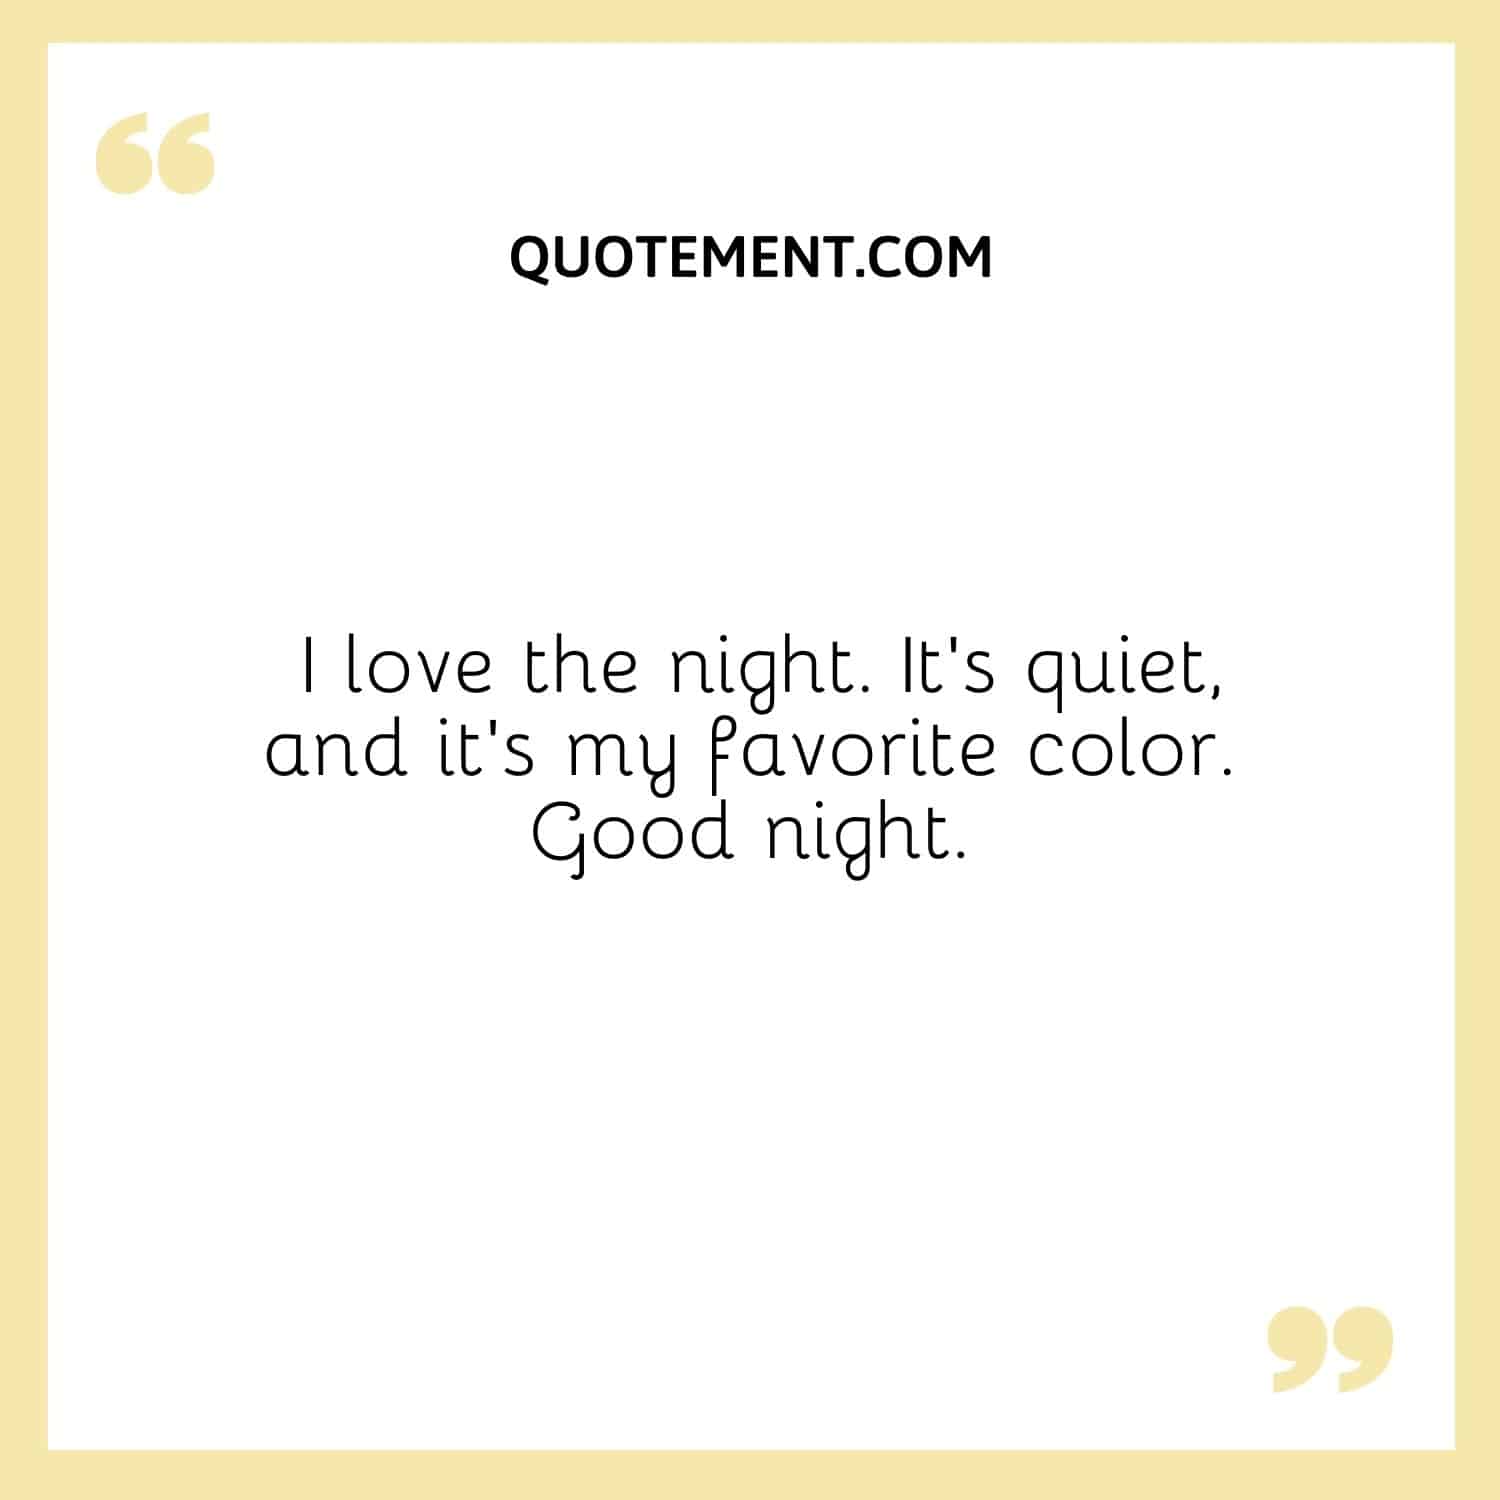 I love the night. It’s quiet, and it’s my favorite color. Good night